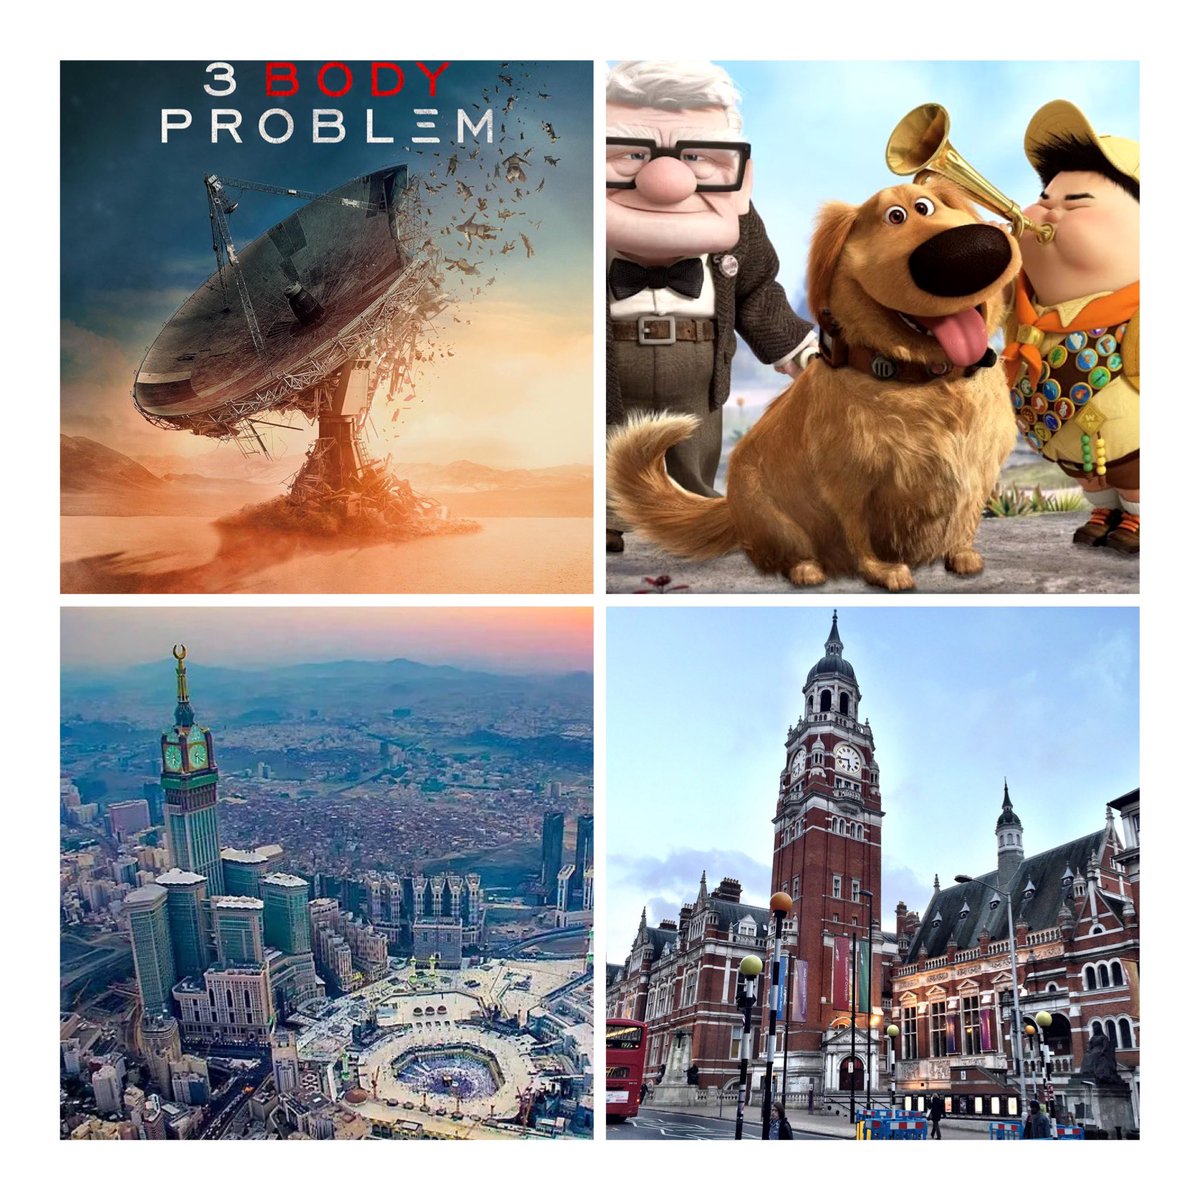 No one warned me that taking Melatonin late at night would result in a dream consisting of an adventure with Dug the Dog from the movie UP, with of plot-line from “3 Body Problem” all taking place in Croydon in South London and in Makkah!!! 😅🤪